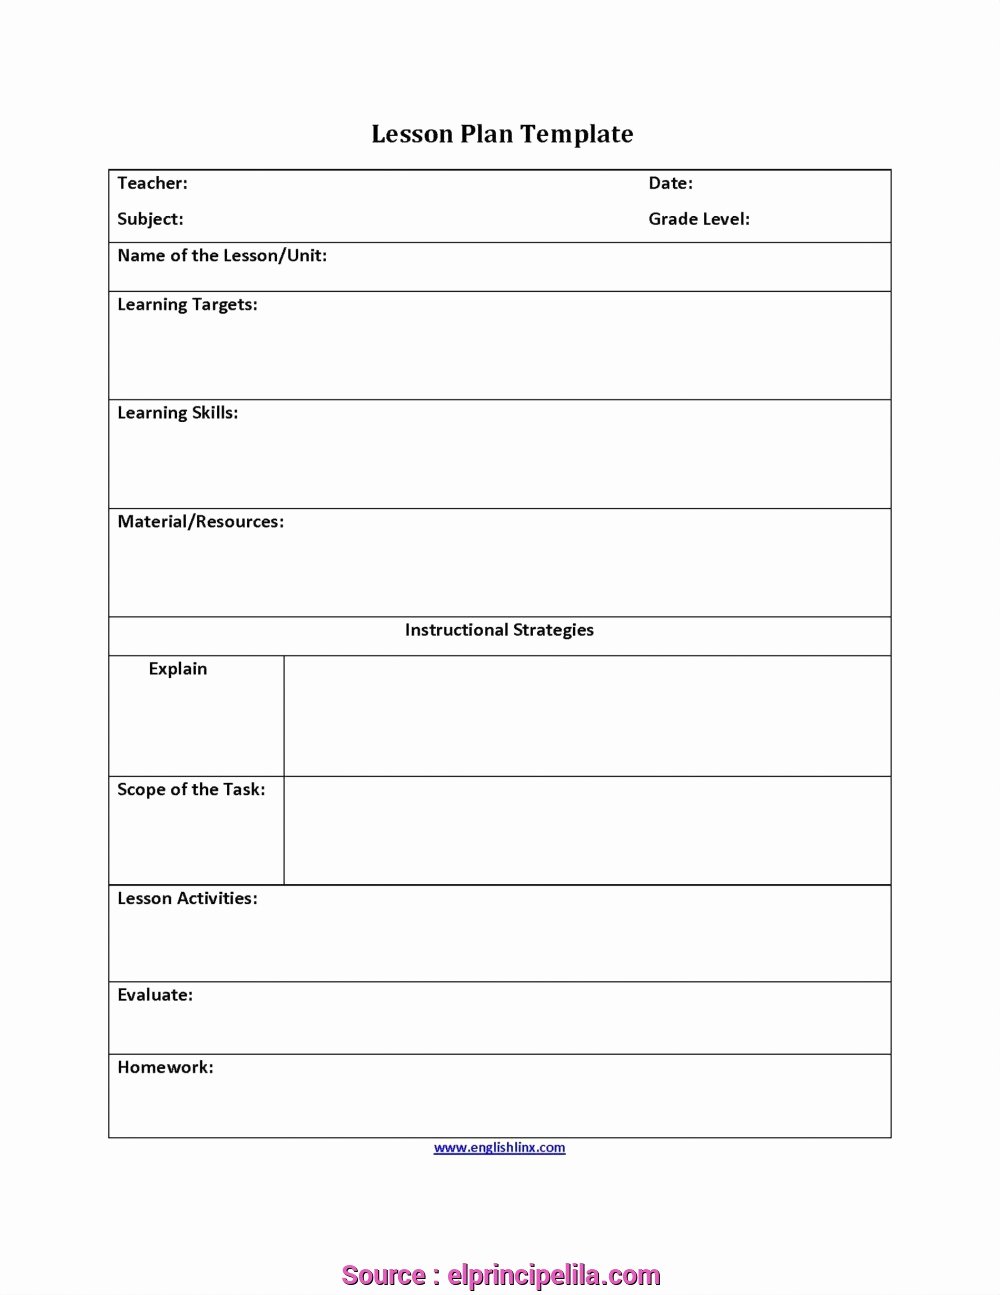 Physical Education Lesson Plan Templates New 6 Professional Physical Education Lesson Plans Doc S